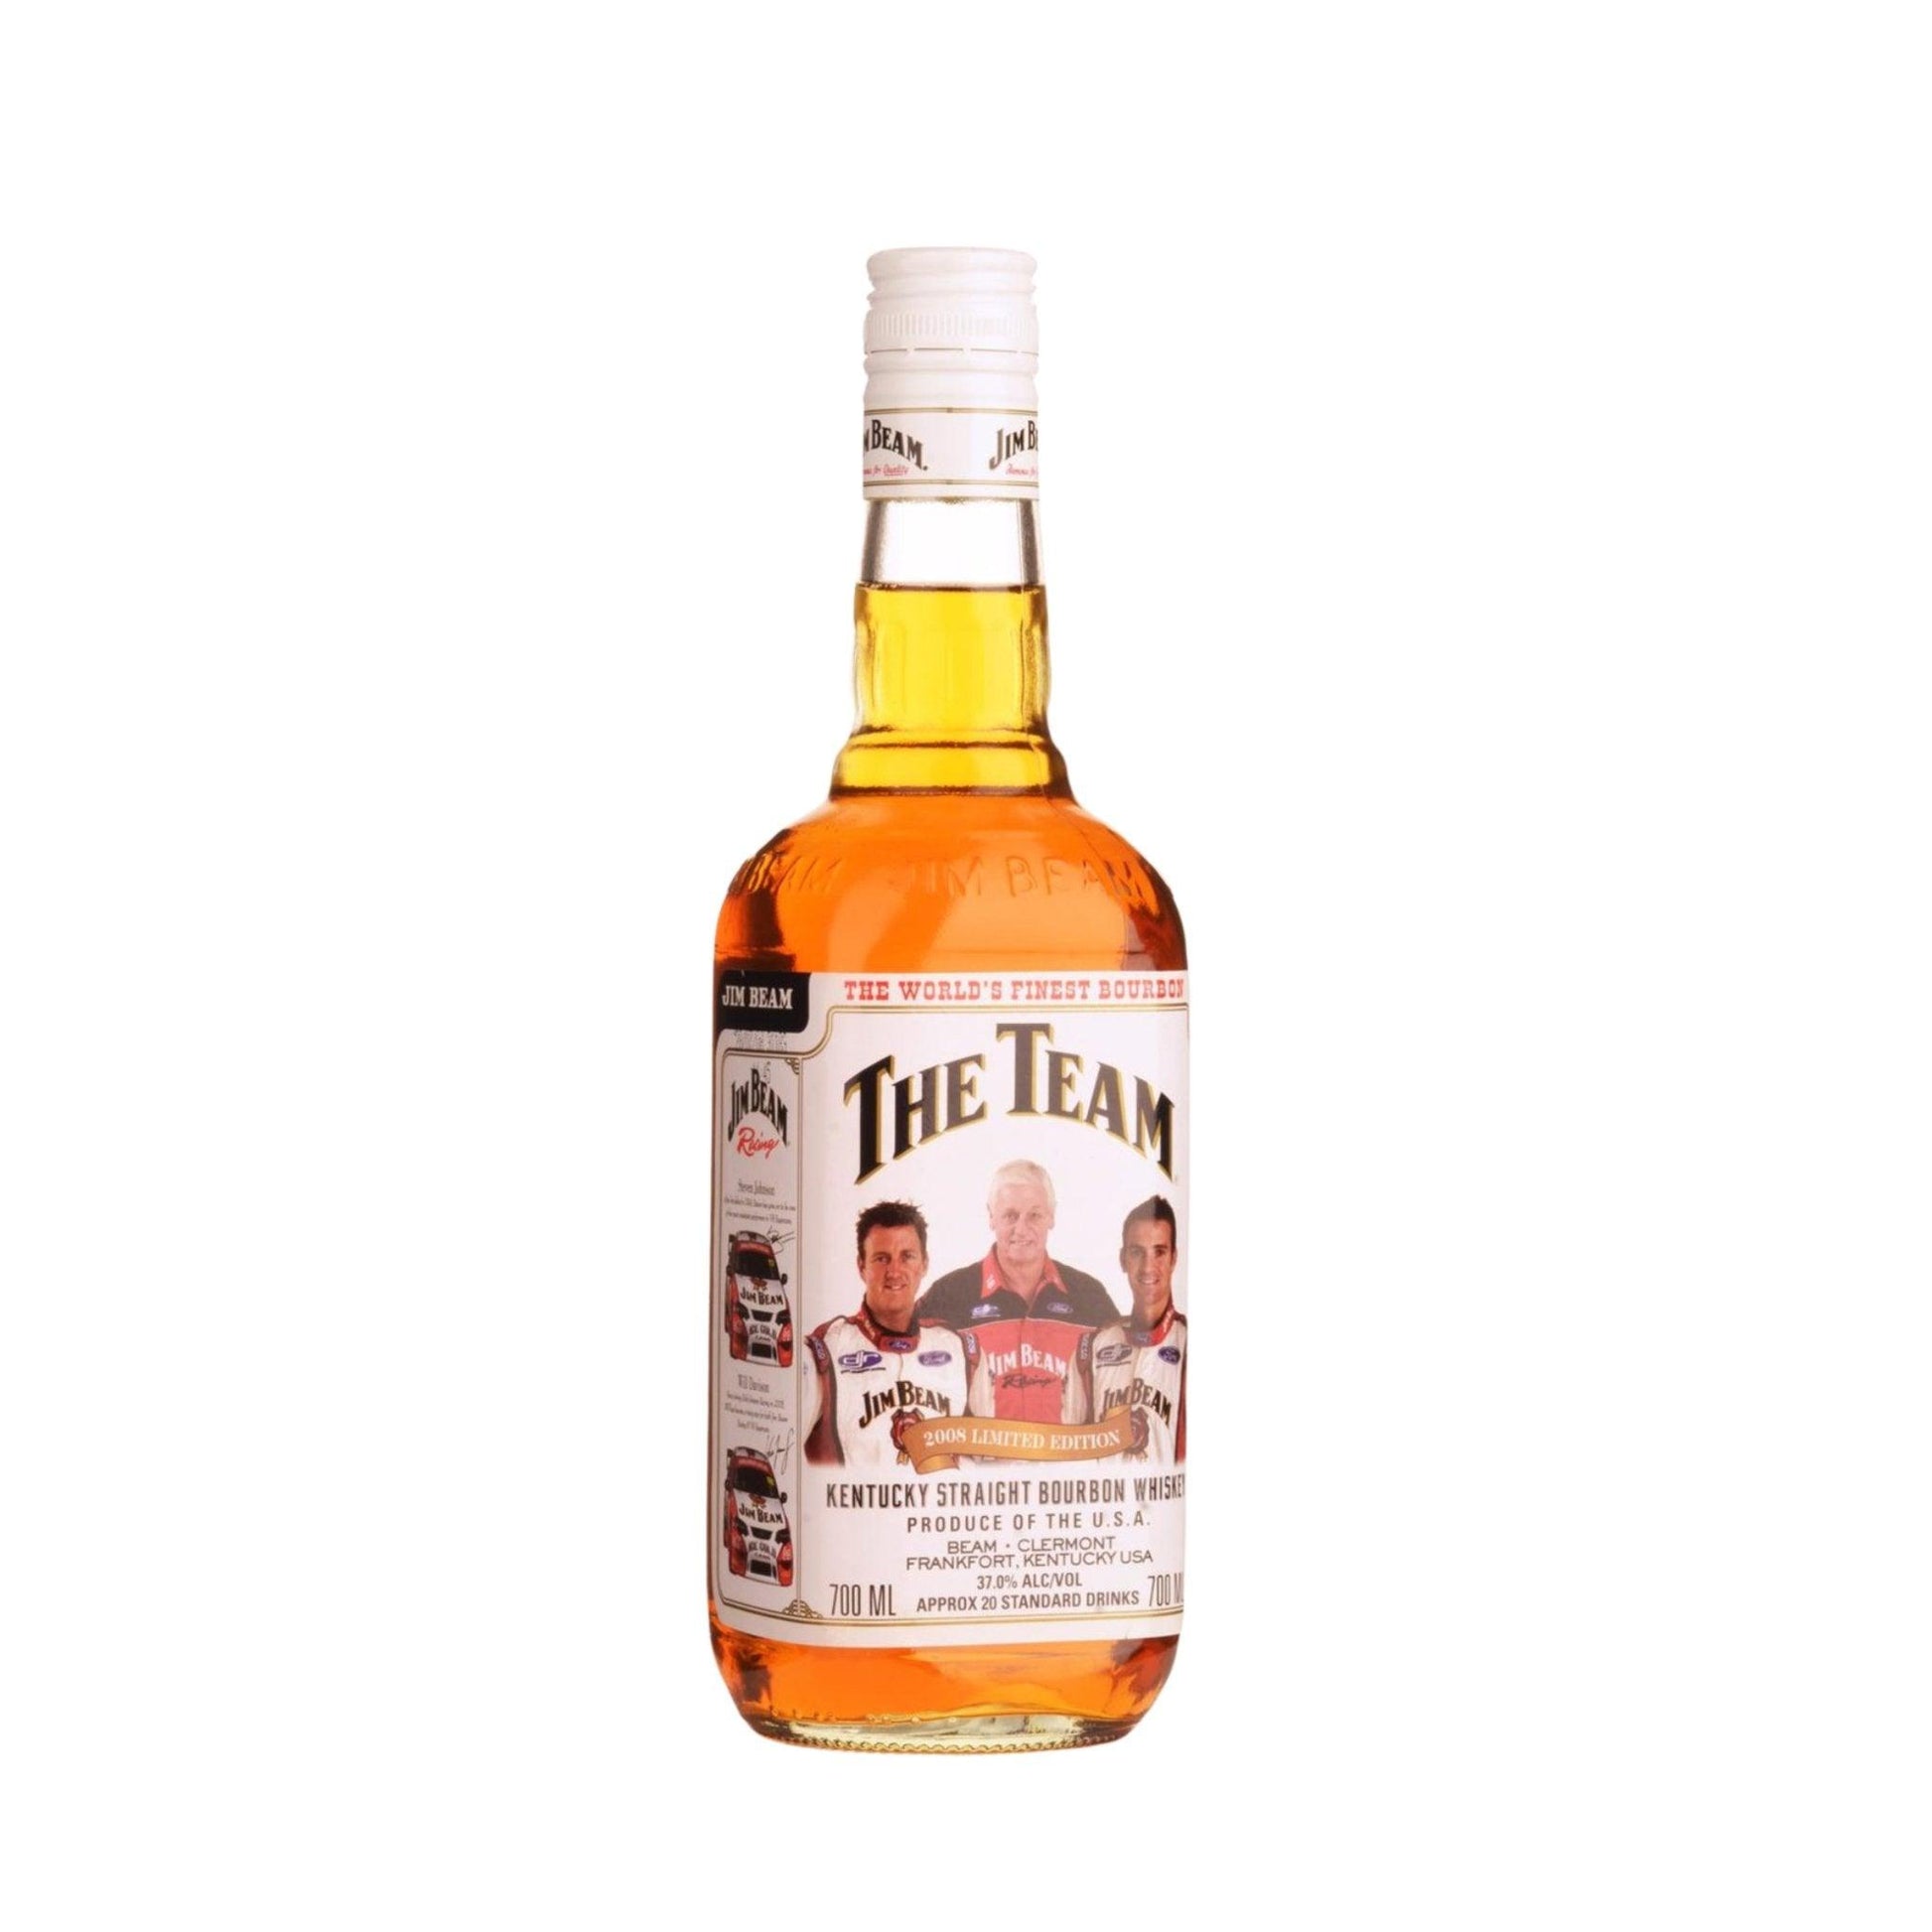 Jim Beam "The Team" 2008 Limited Edition Bourbon Whiskey 700ml - Booze House